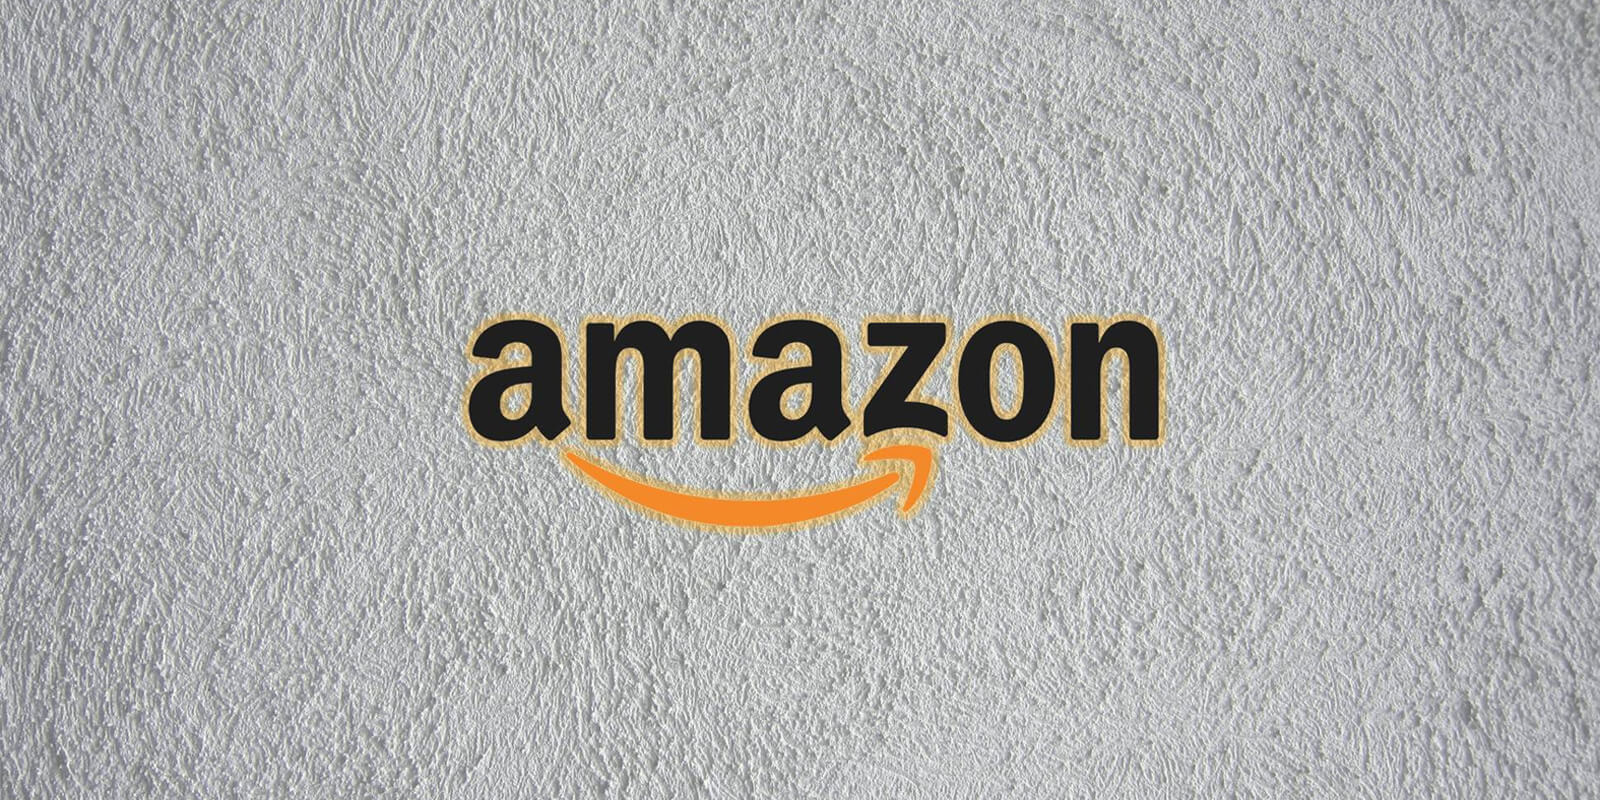 Fake Amazon gift card emails deliver the Dridex malware